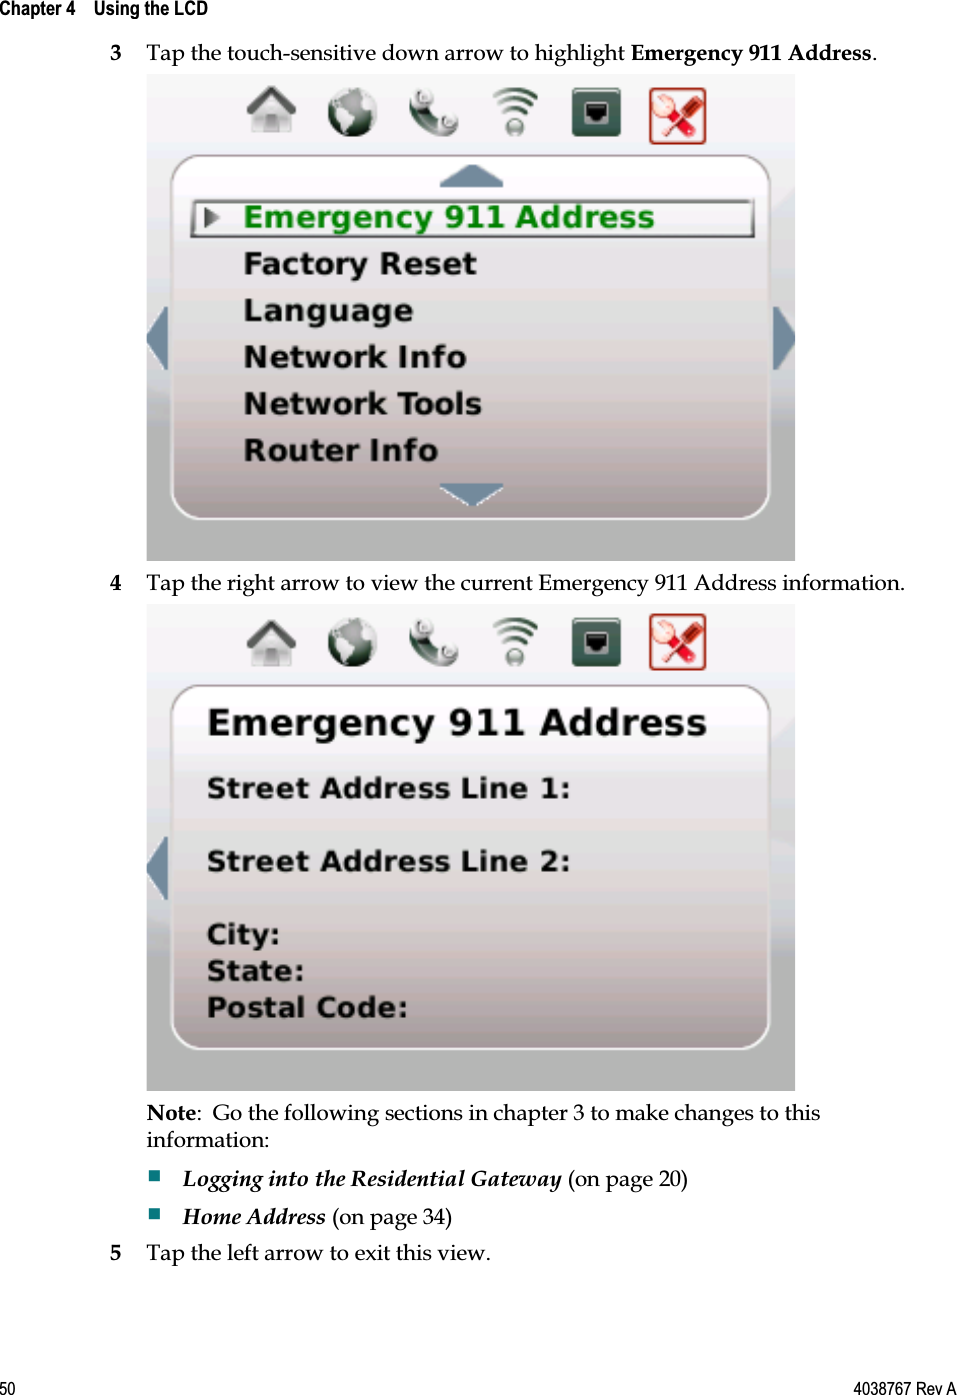  Chapter 4    Using the LCD    50  4038767 Rev A 3 Tap the touch-sensitive down arrow to highlight Emergency 911 Address.  4 Tap the right arrow to view the current Emergency 911 Address information.  Note:  Go the following sections in chapter 3 to make changes to this information:  Logging into the Residential Gateway (on page 20)  Home Address (on page 34) 5 Tap the left arrow to exit this view.  